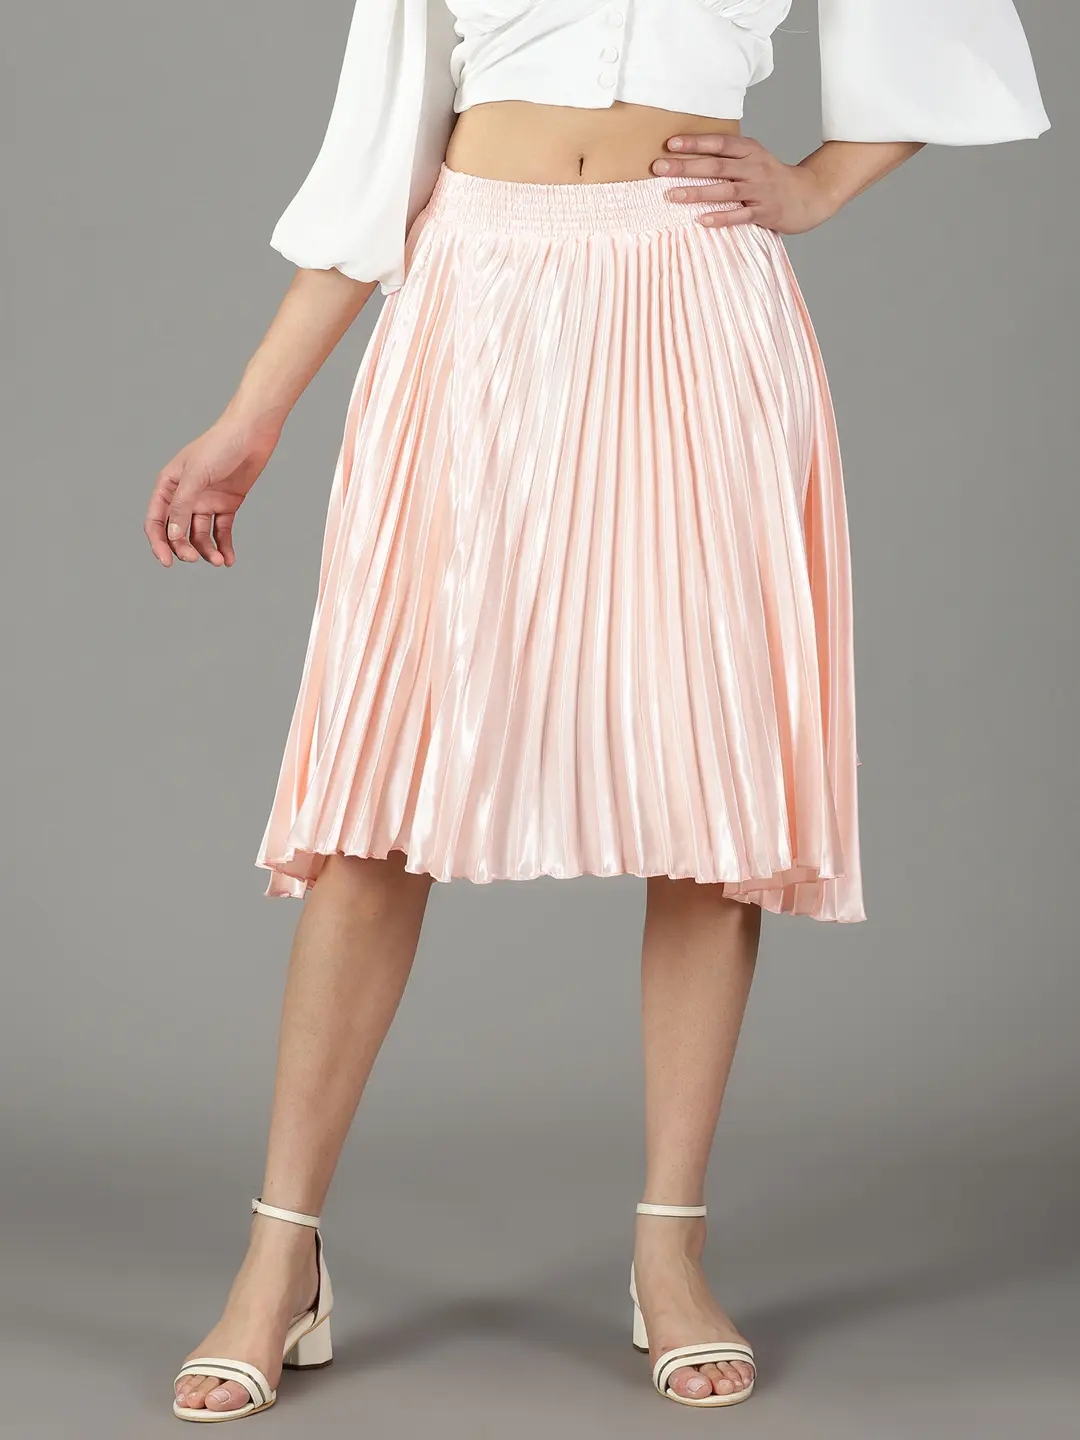 SHOWOFF Women's Solid Peach Satin Flared Skirt